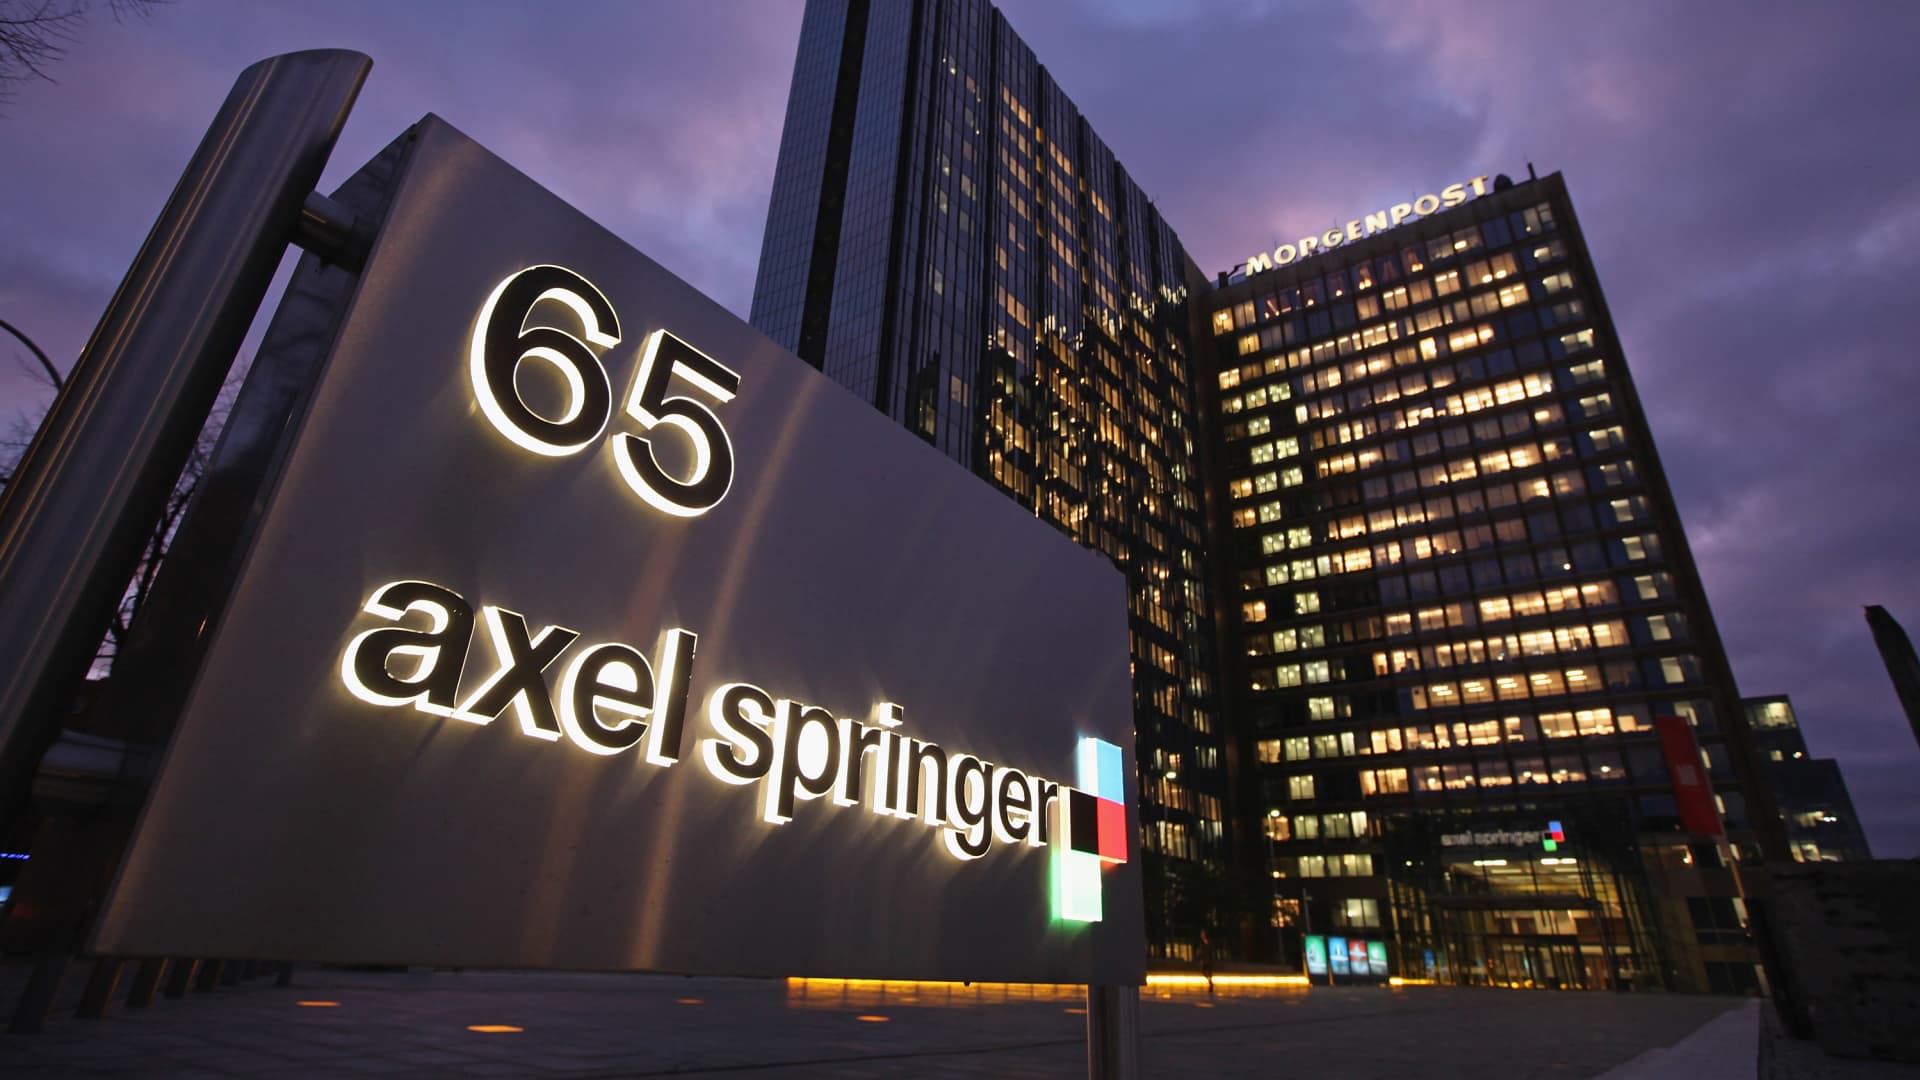 The corporate headquarters of Axel Springer publishing house in Berlin, Germany.